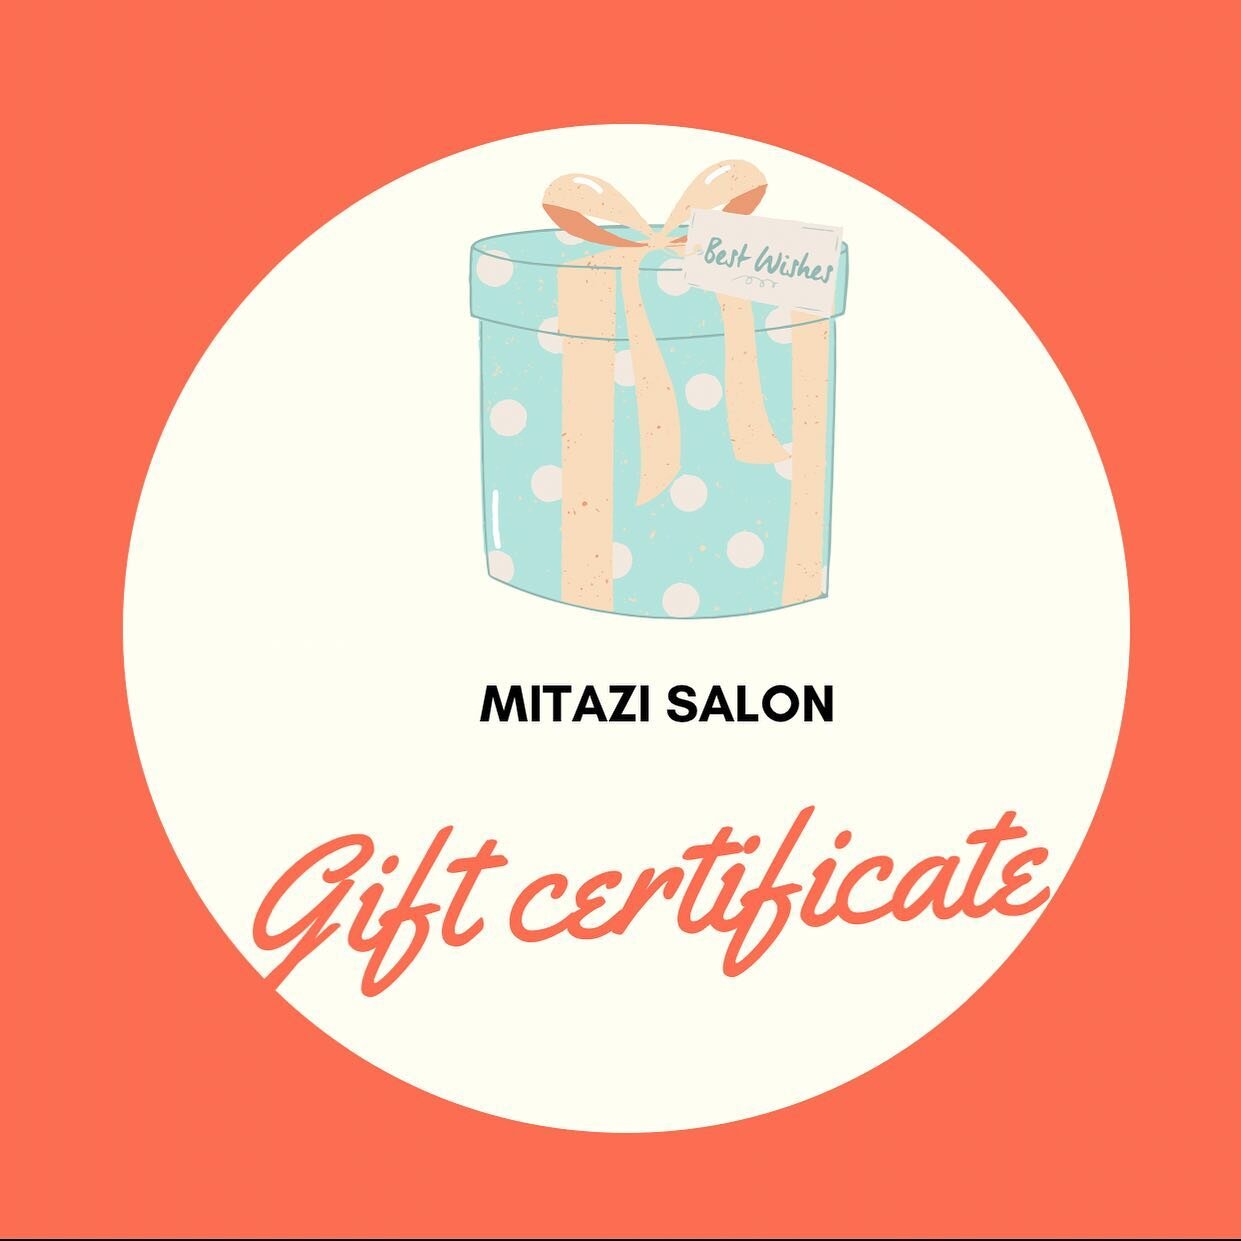 Treat a loved one 💙🎁
Gift certificates are available for purchase online and offline. Check our website or at the store #giftcard #certificate #treatyourself